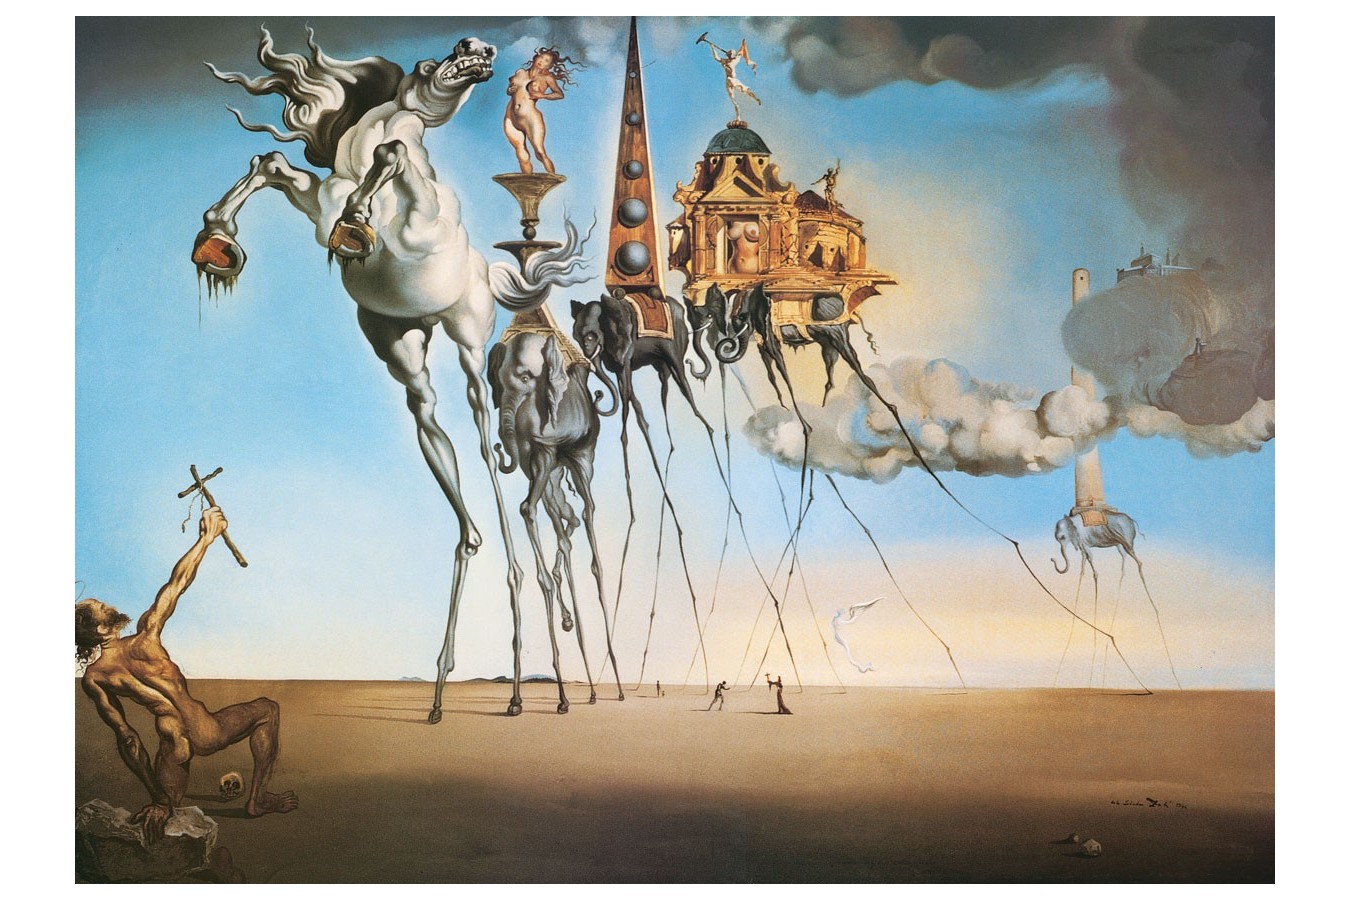 Puzzle Eurographics - Salvador Dali: The Temptation of St. Anthony, 1000 piese (6000-0847)